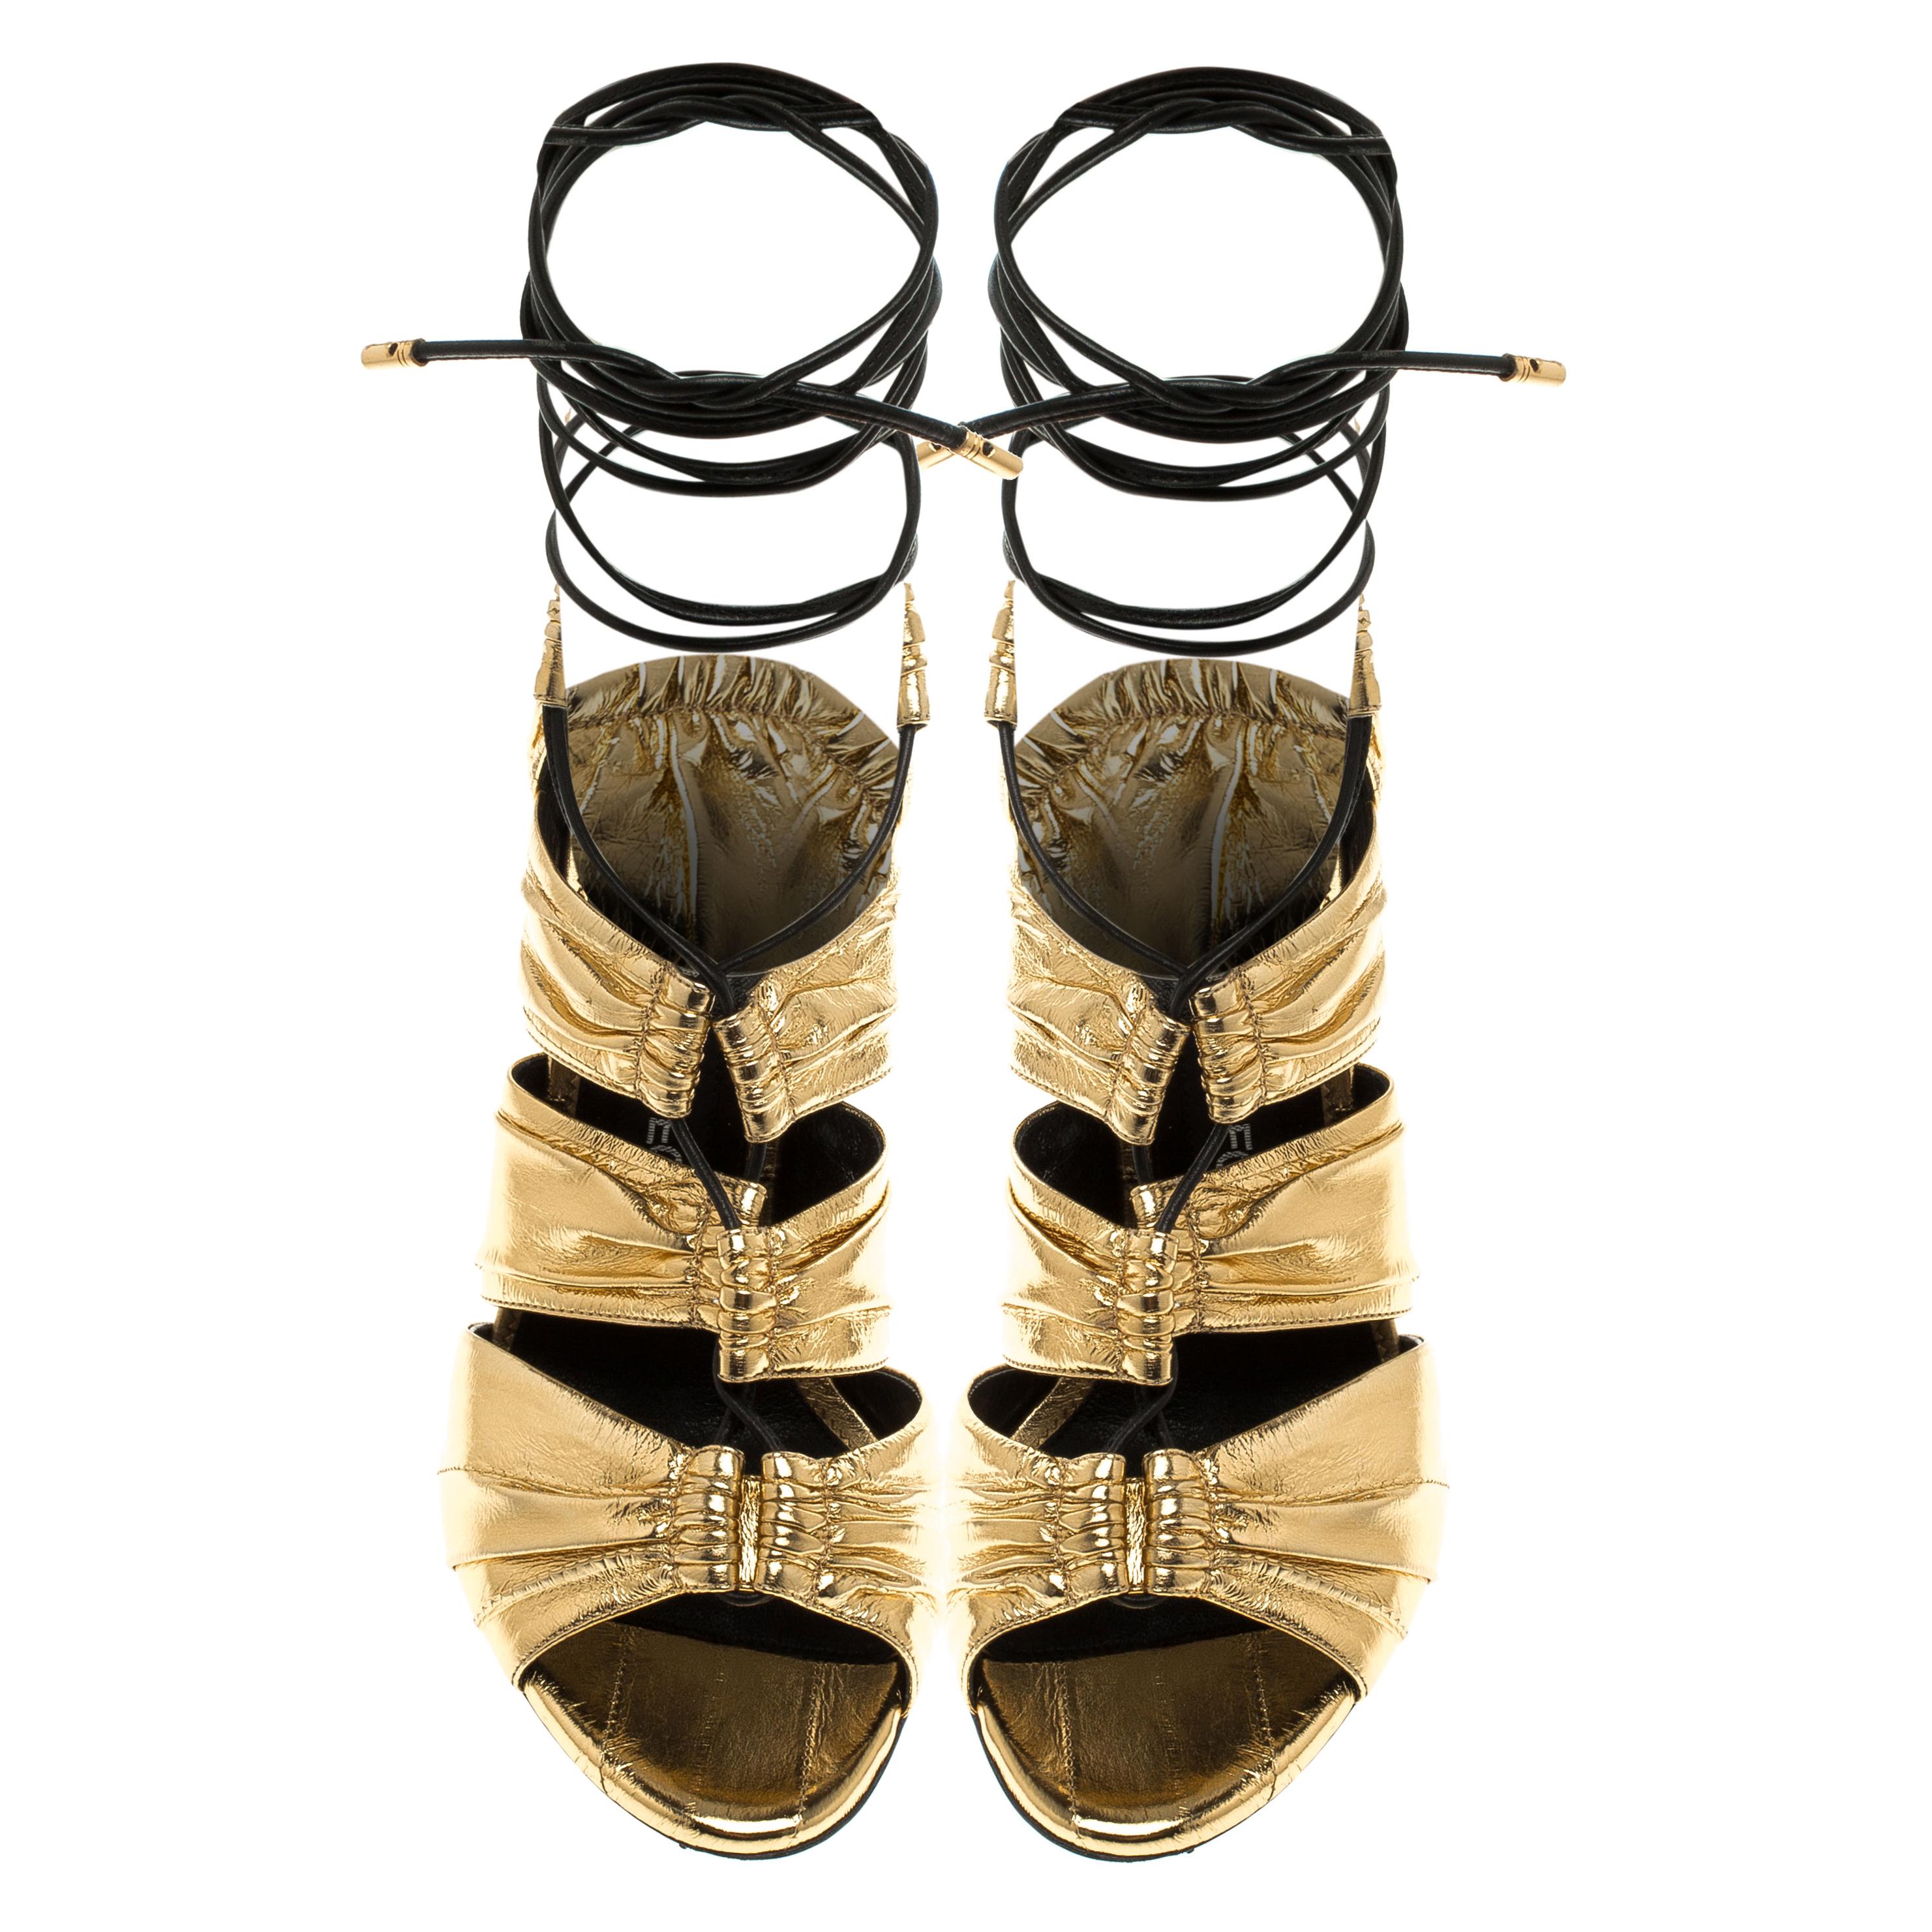 Crafted exquisitely from gold leather in cutouts and ruched design, these Tom Ford sandals were built to lift your outfits and your spirits. Leather strings are laced perfectly at the front, ending as ties around the ankle while beautifully sculpted